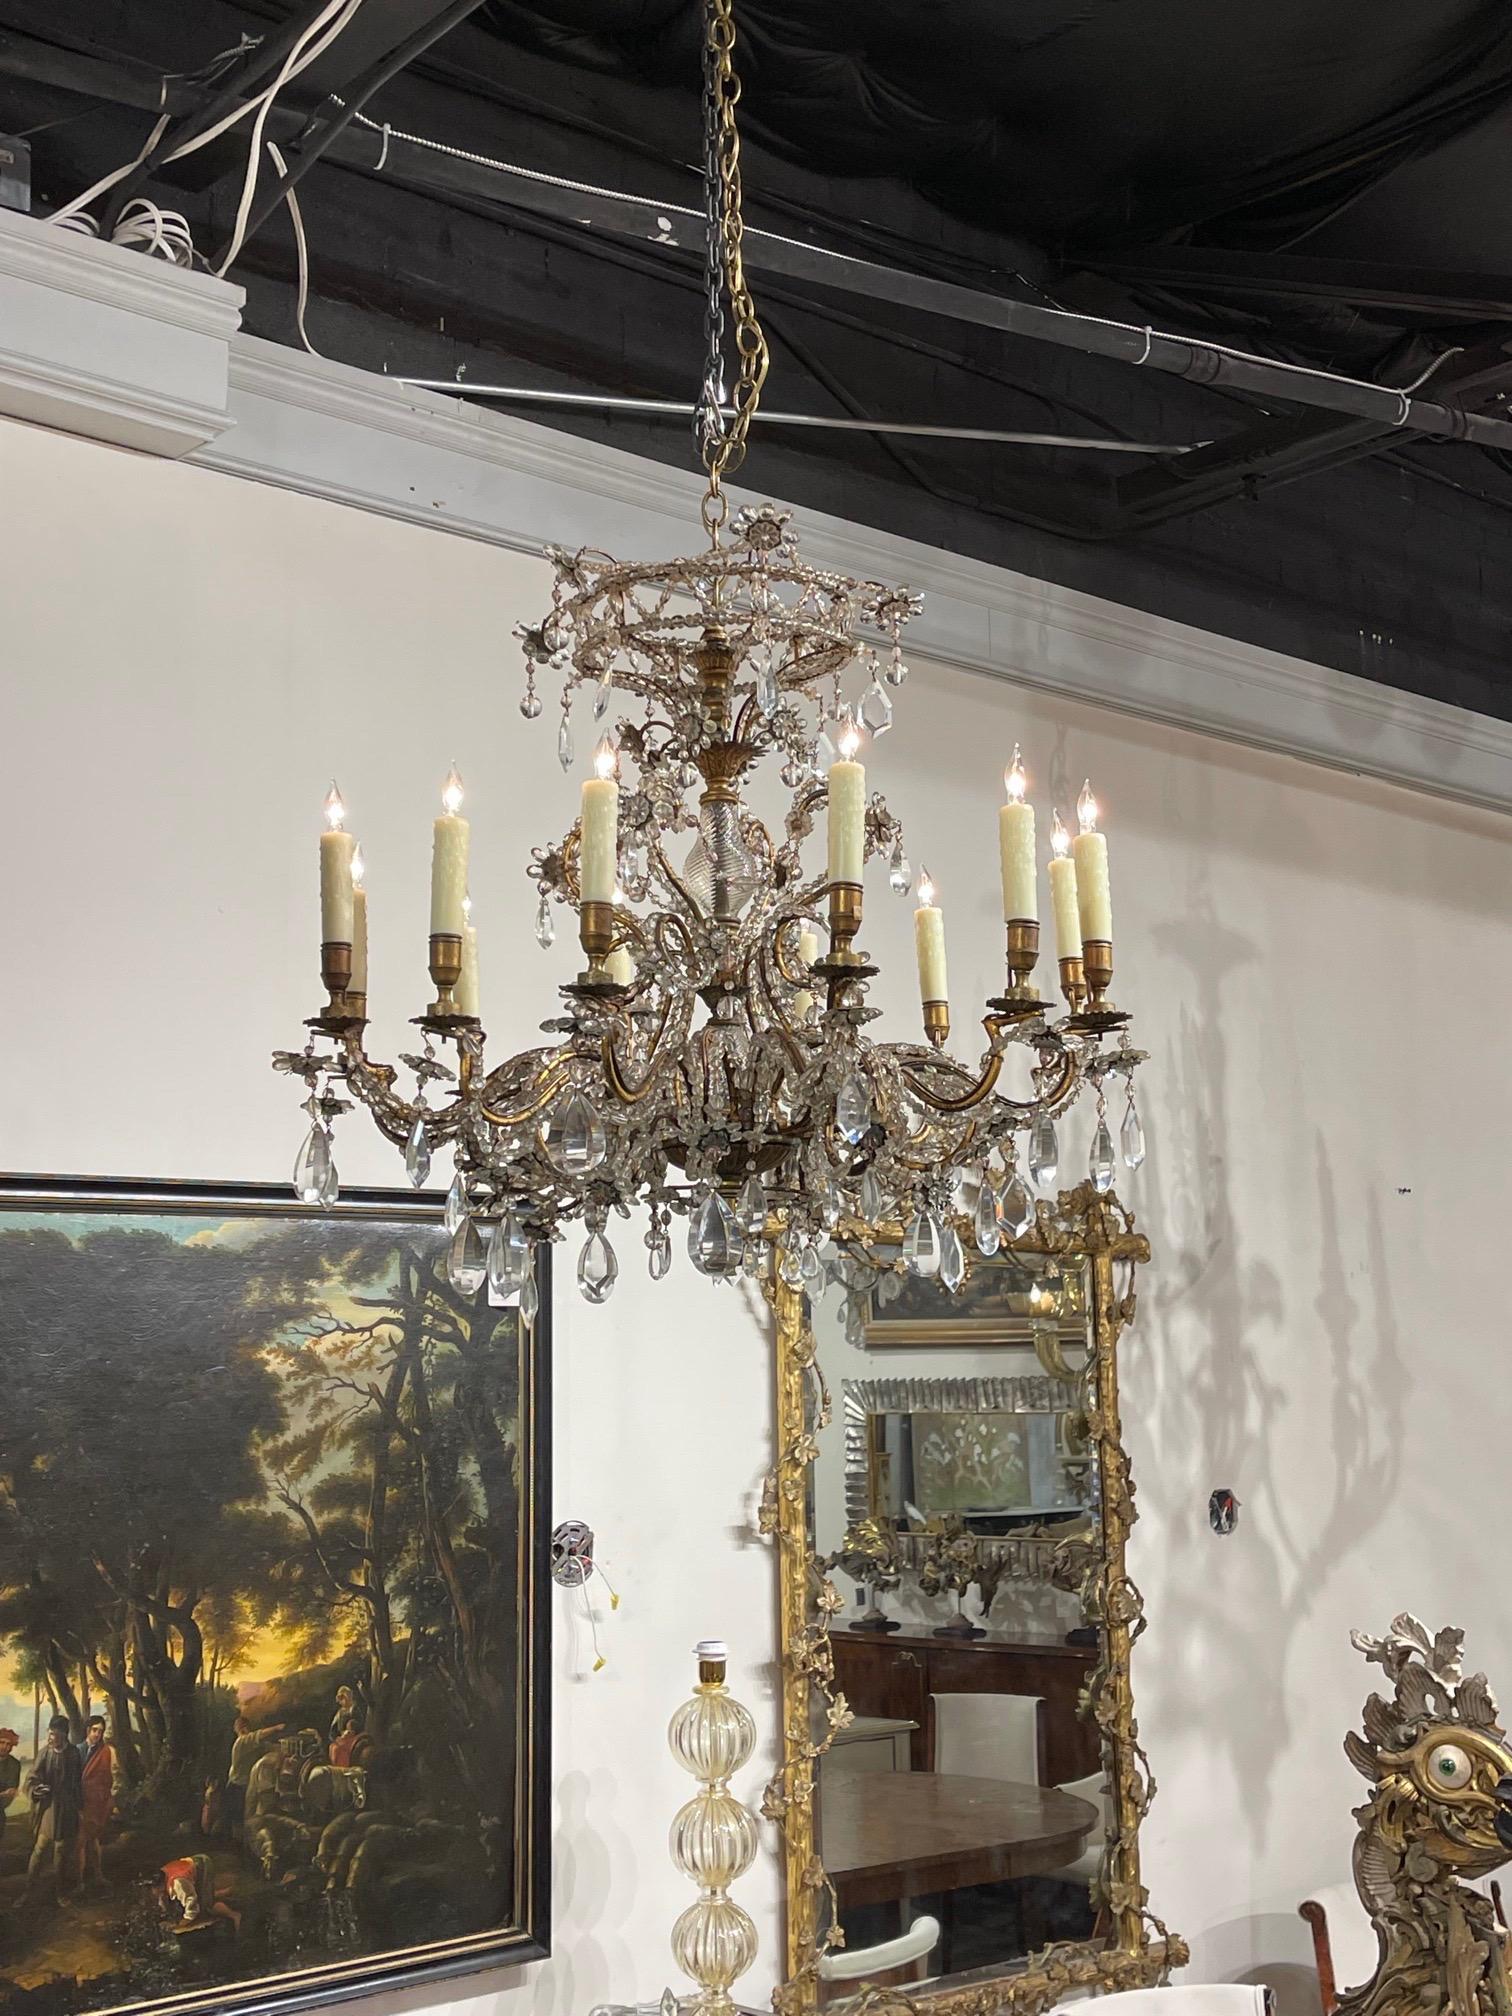 Elegant 19th century Italian beaded crystal and gilt bronze chandelier with 12 lights. Pretty curved base covered in beads and crystal. Makes an impressive statement!!